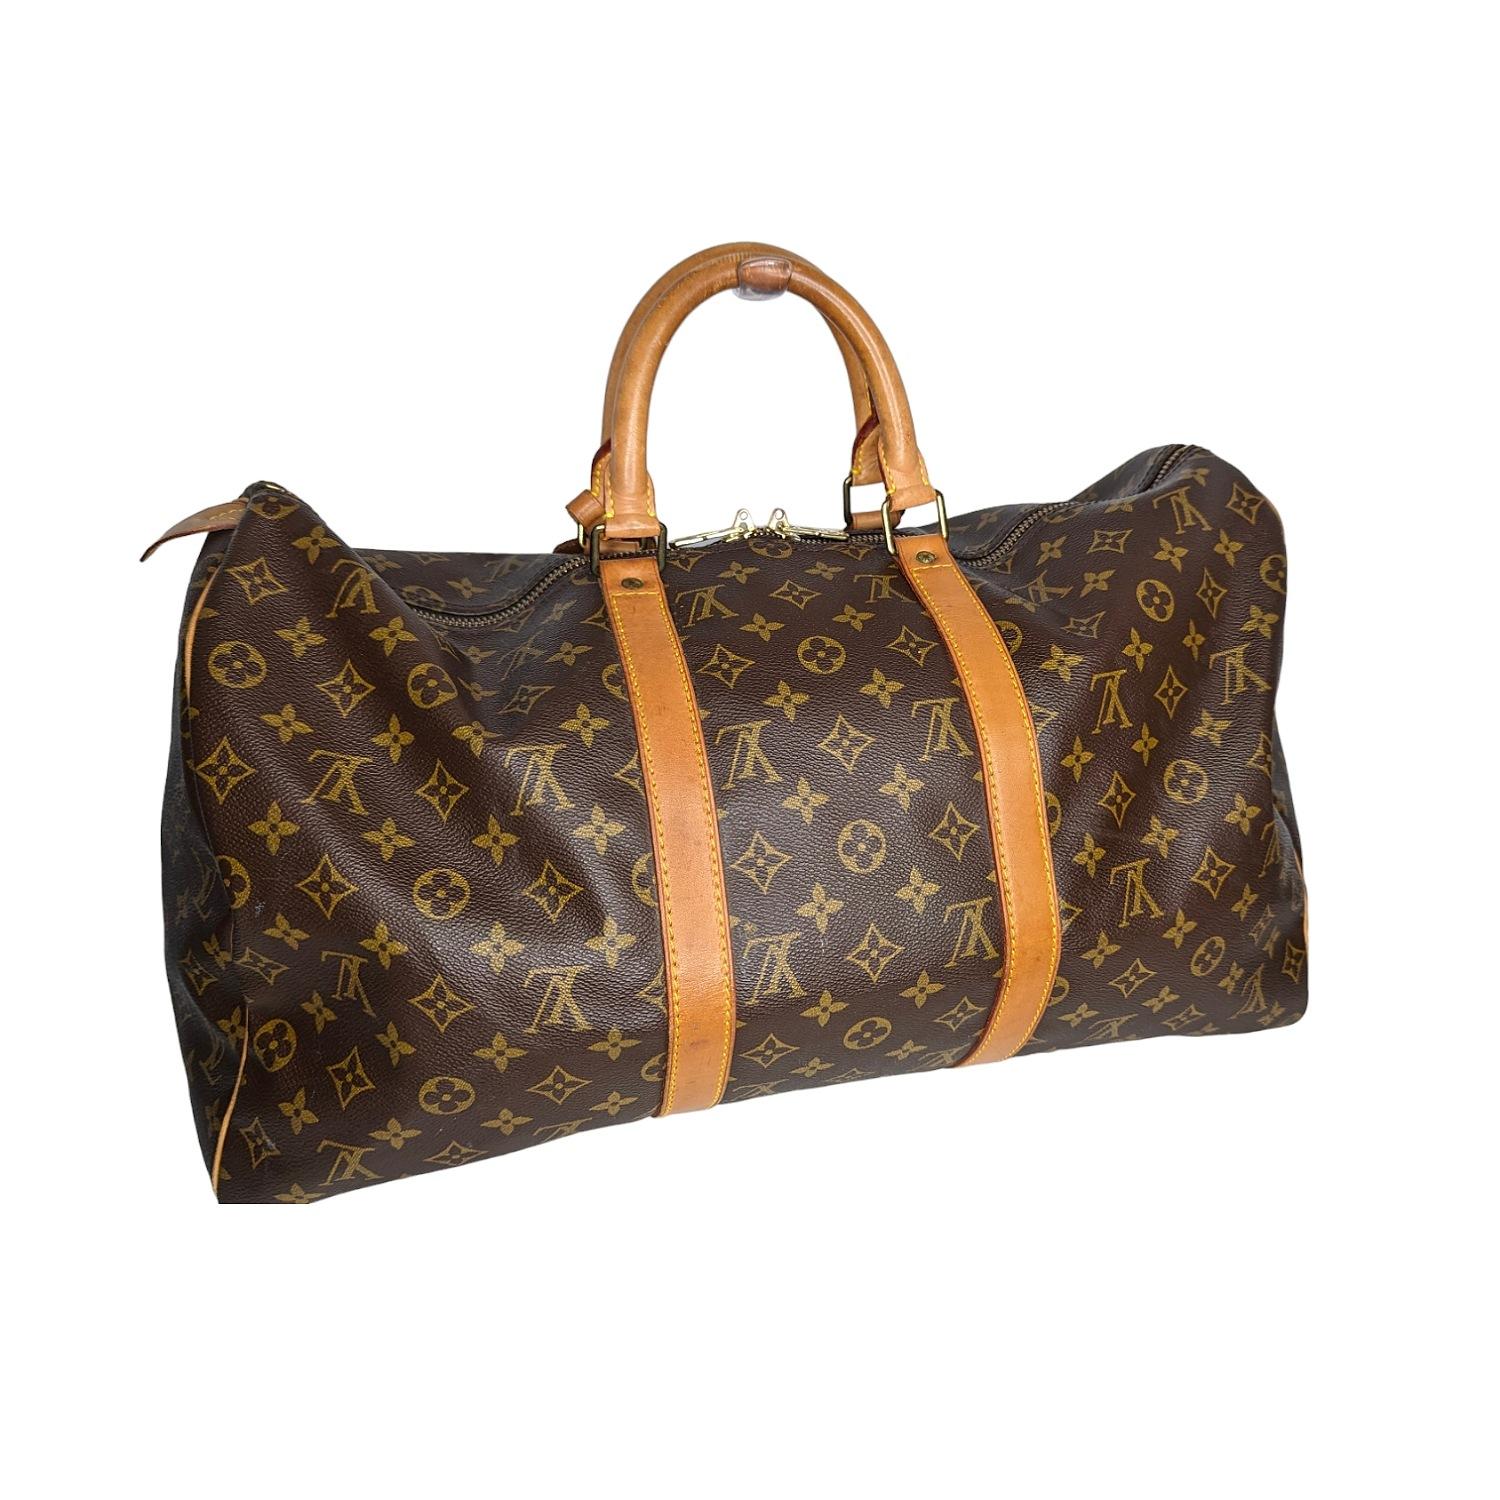 The perfect carry-on Keepall duffle bag rendered in the house's iconic Monogram coated canvas, featuring Vachetta leather trim and accented with gold-tone brass hardware. Est. Retail $1,740.

Designer: Louis Vuitton
Material: Monogram canvas;